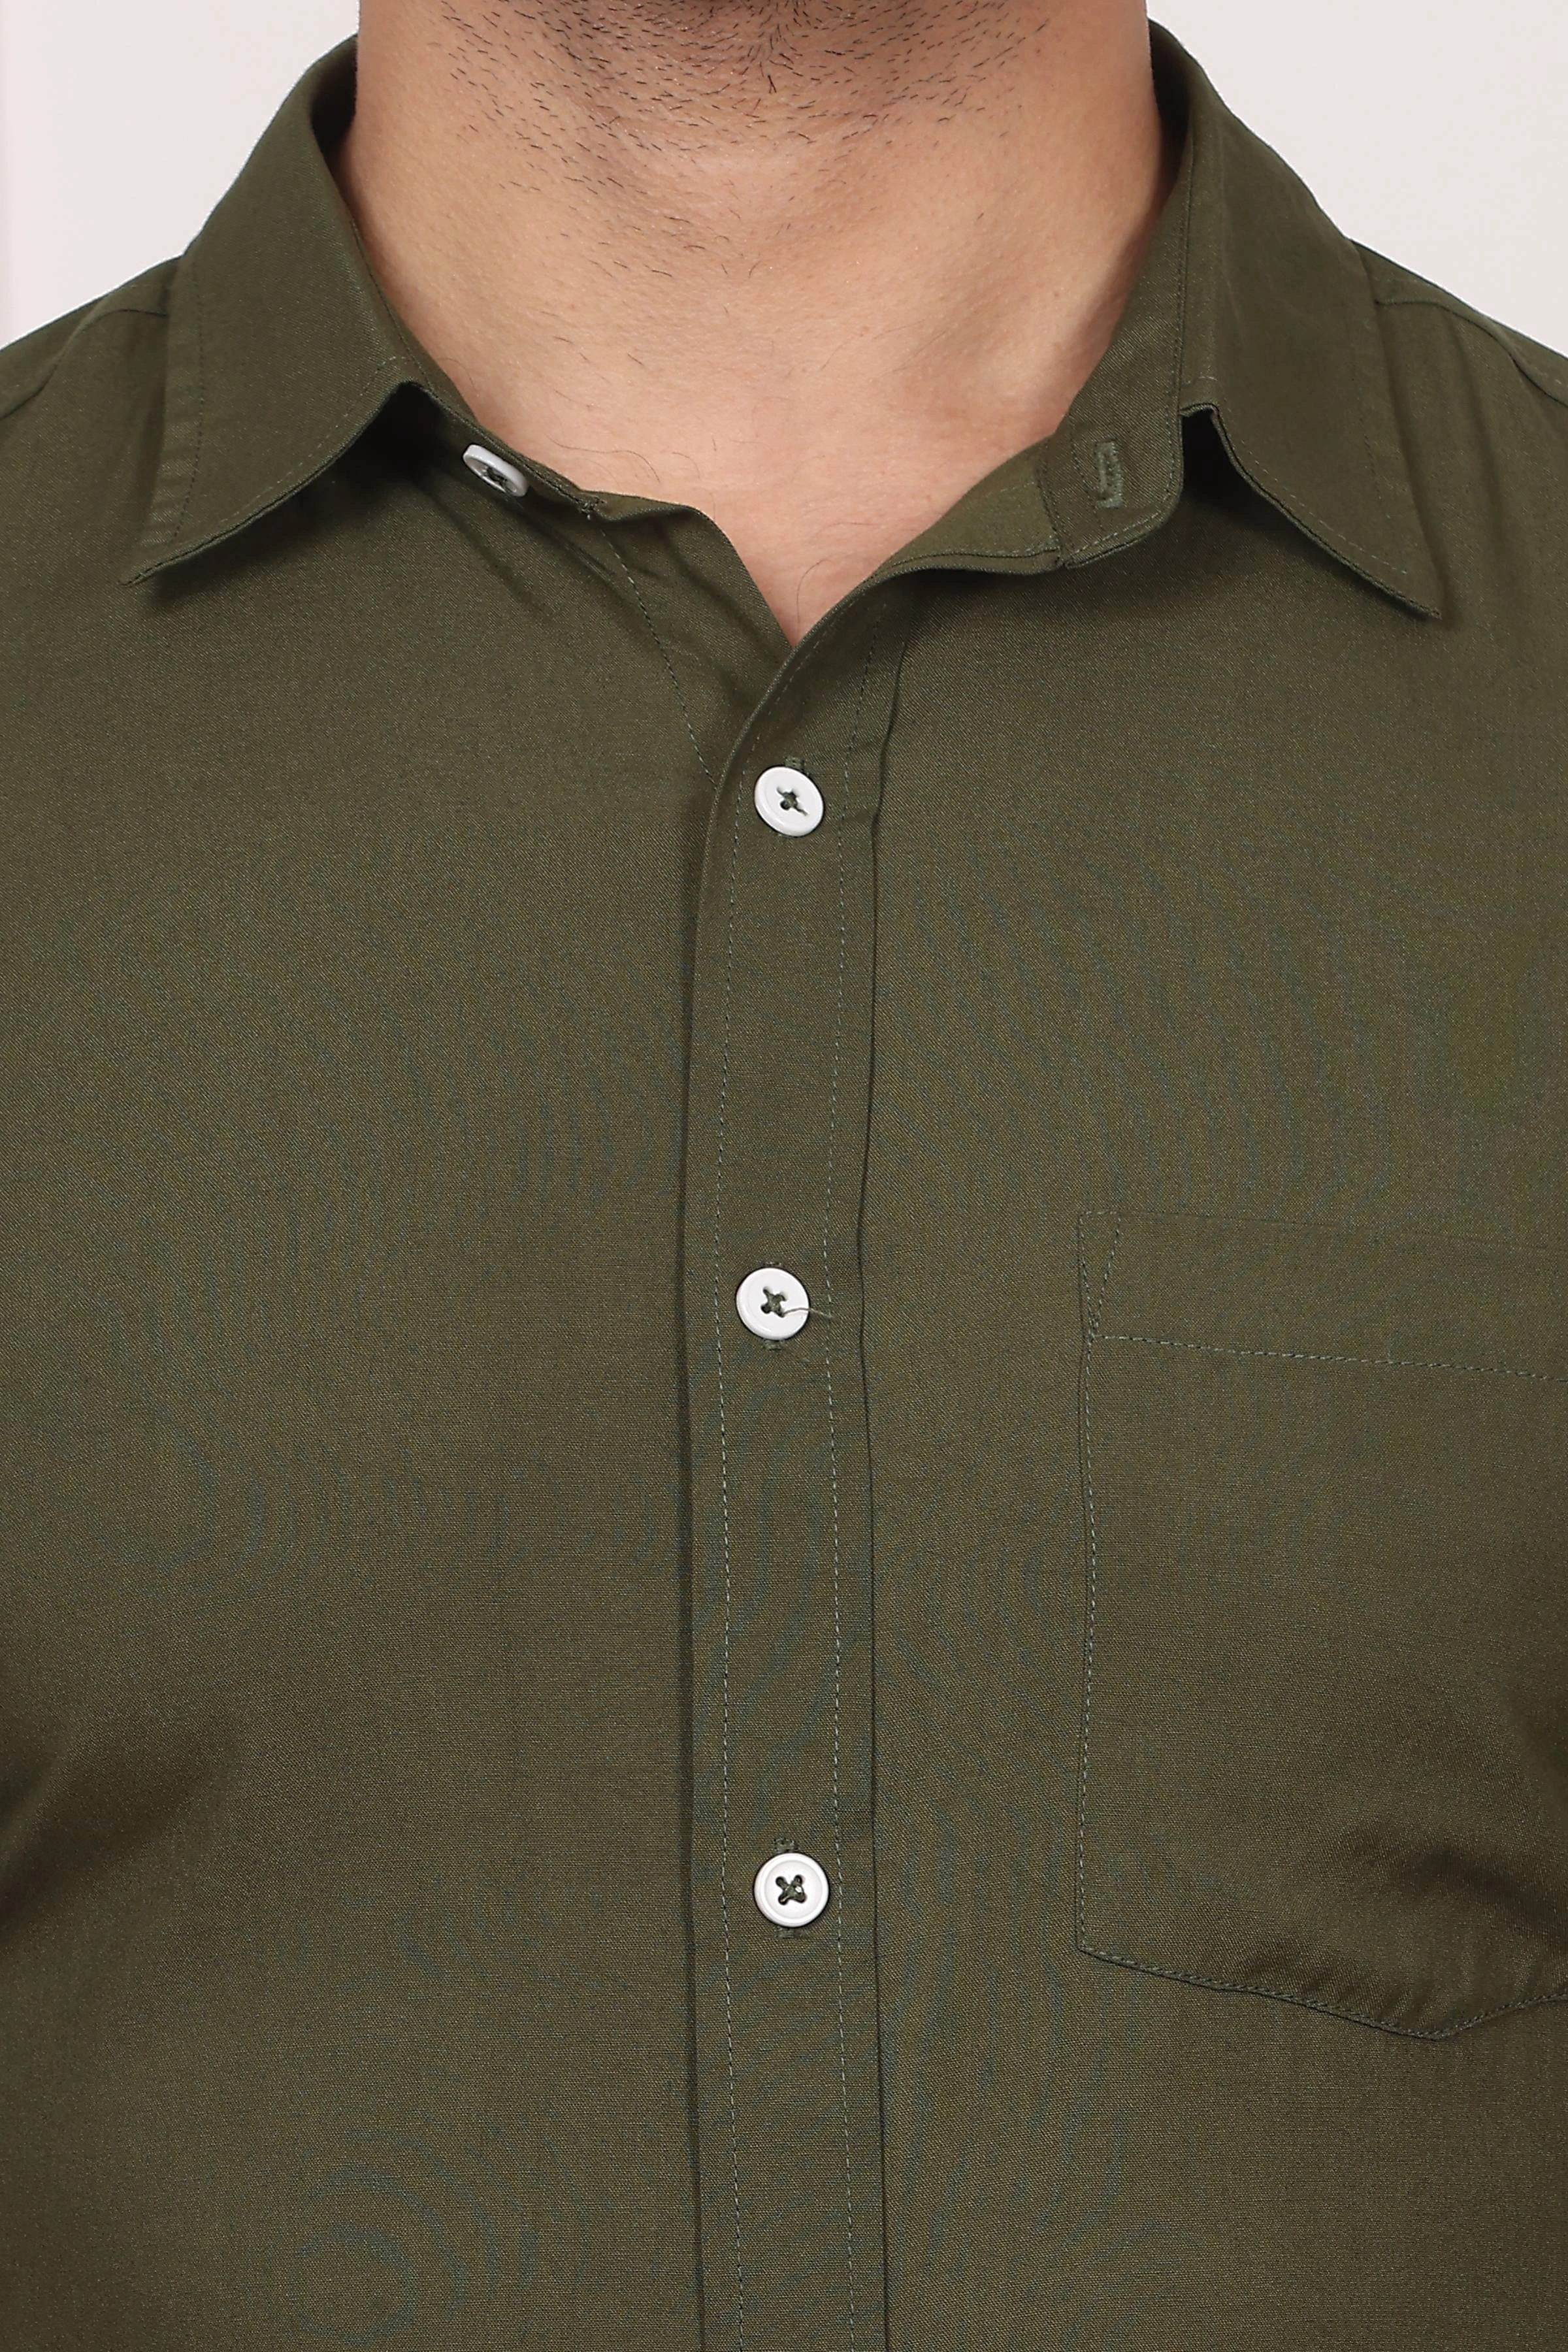 Olive Green Formal Cotton Shirt-S-5